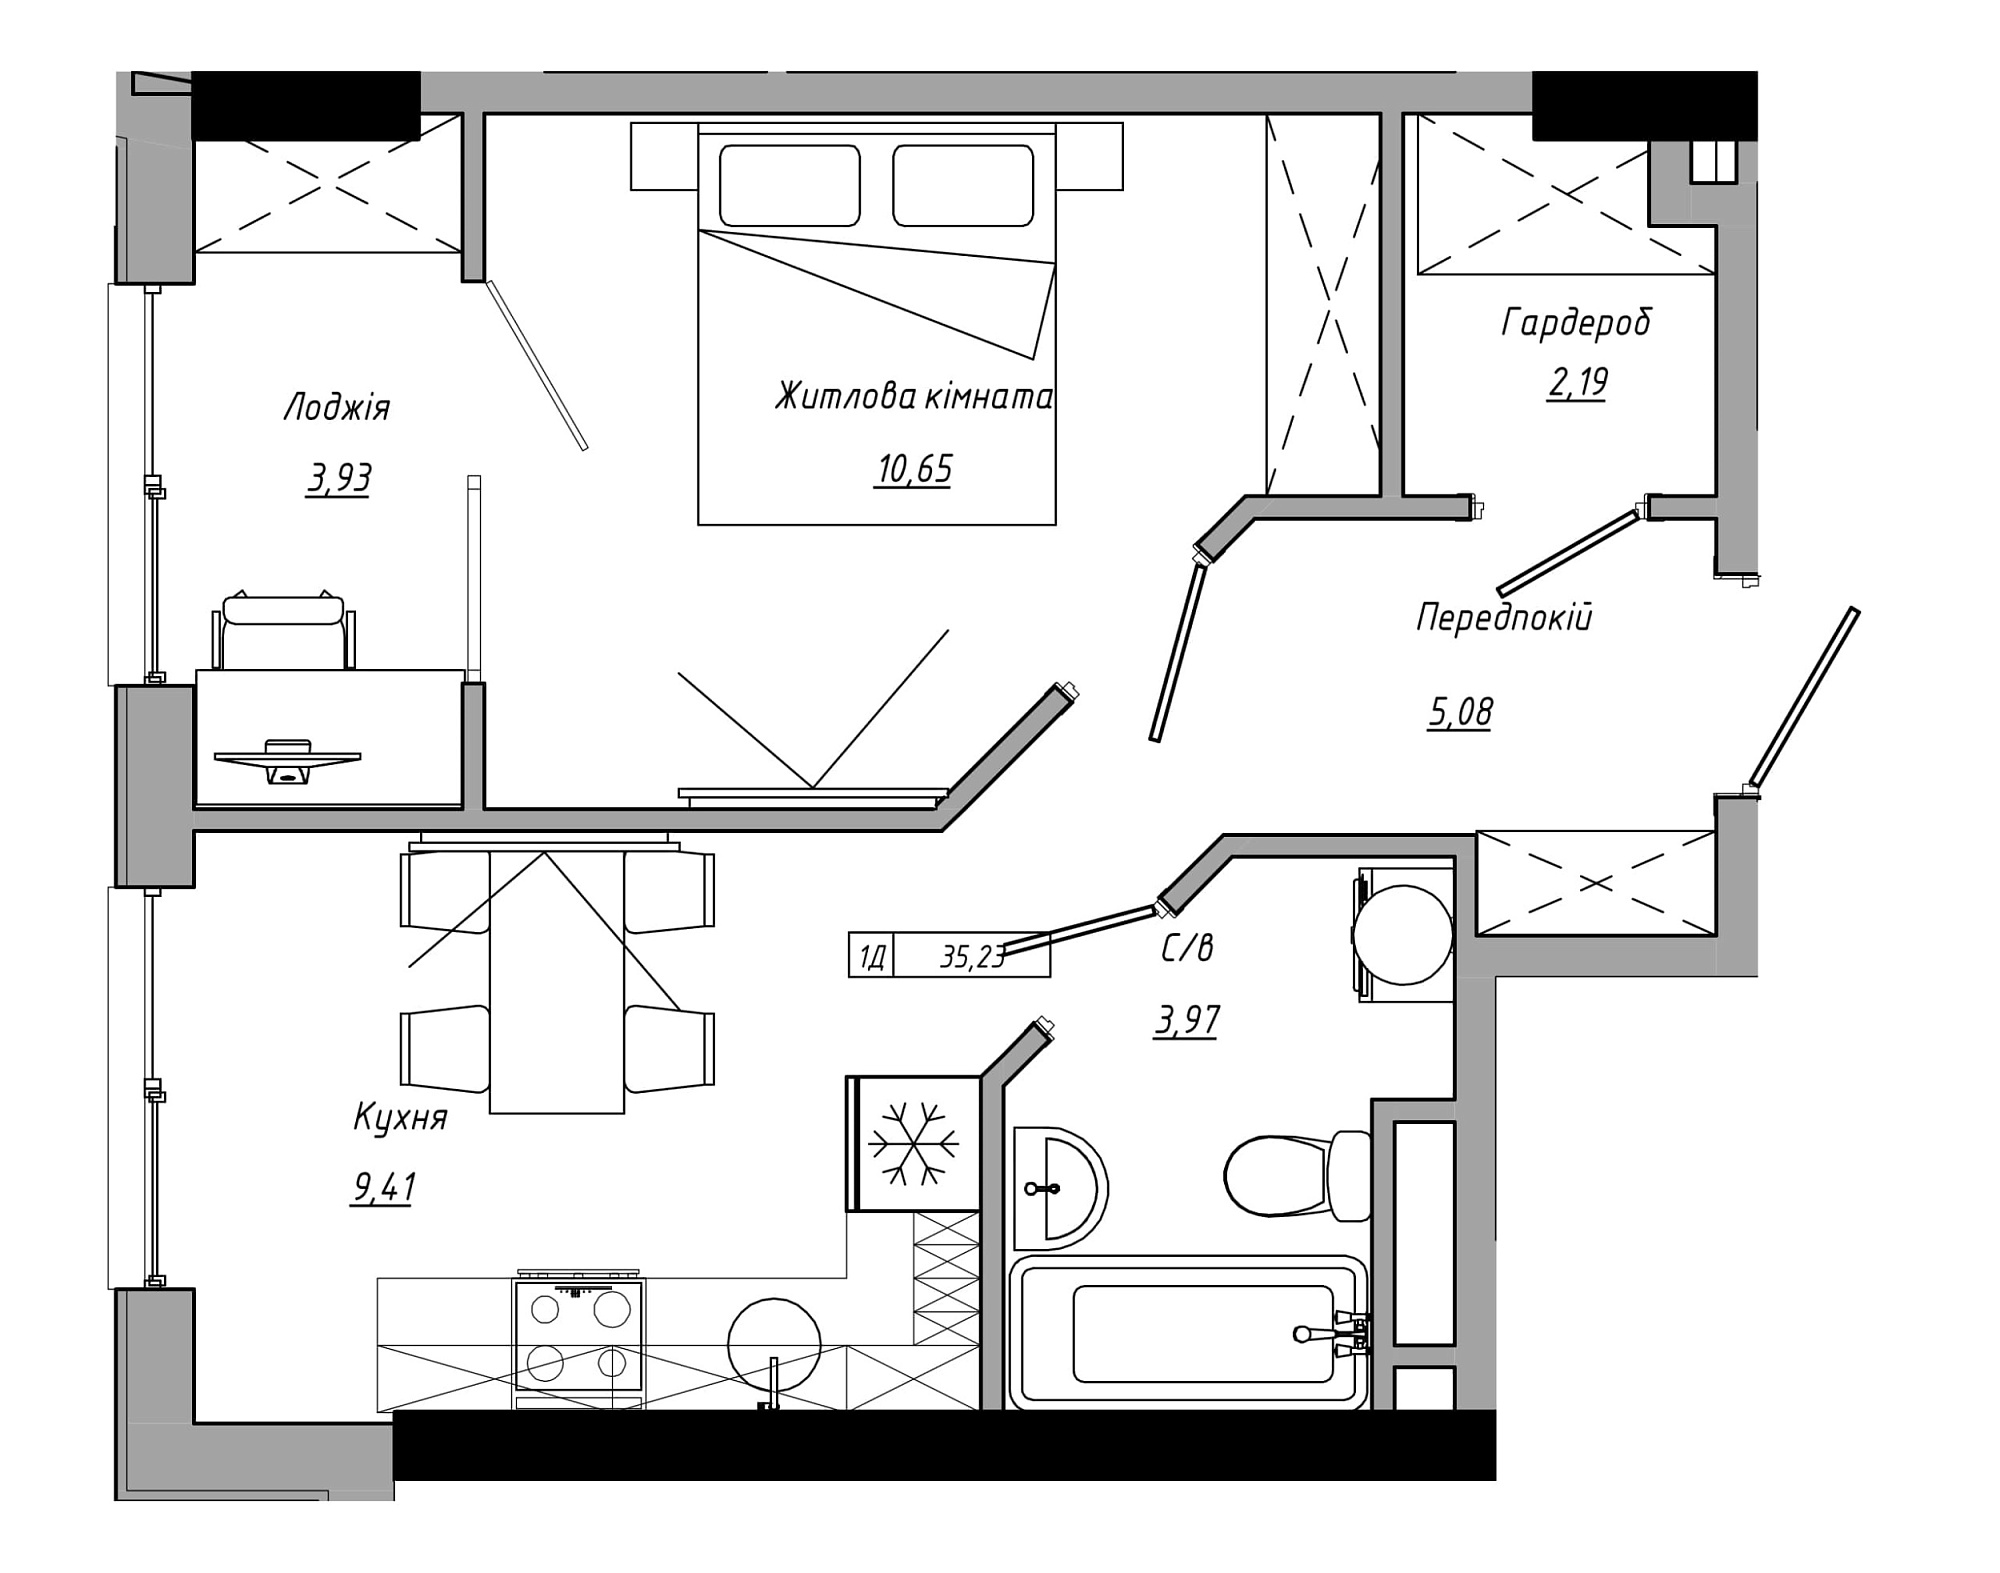 Planning 1-rm flats area 35.23m2, AB-21-05/00006.